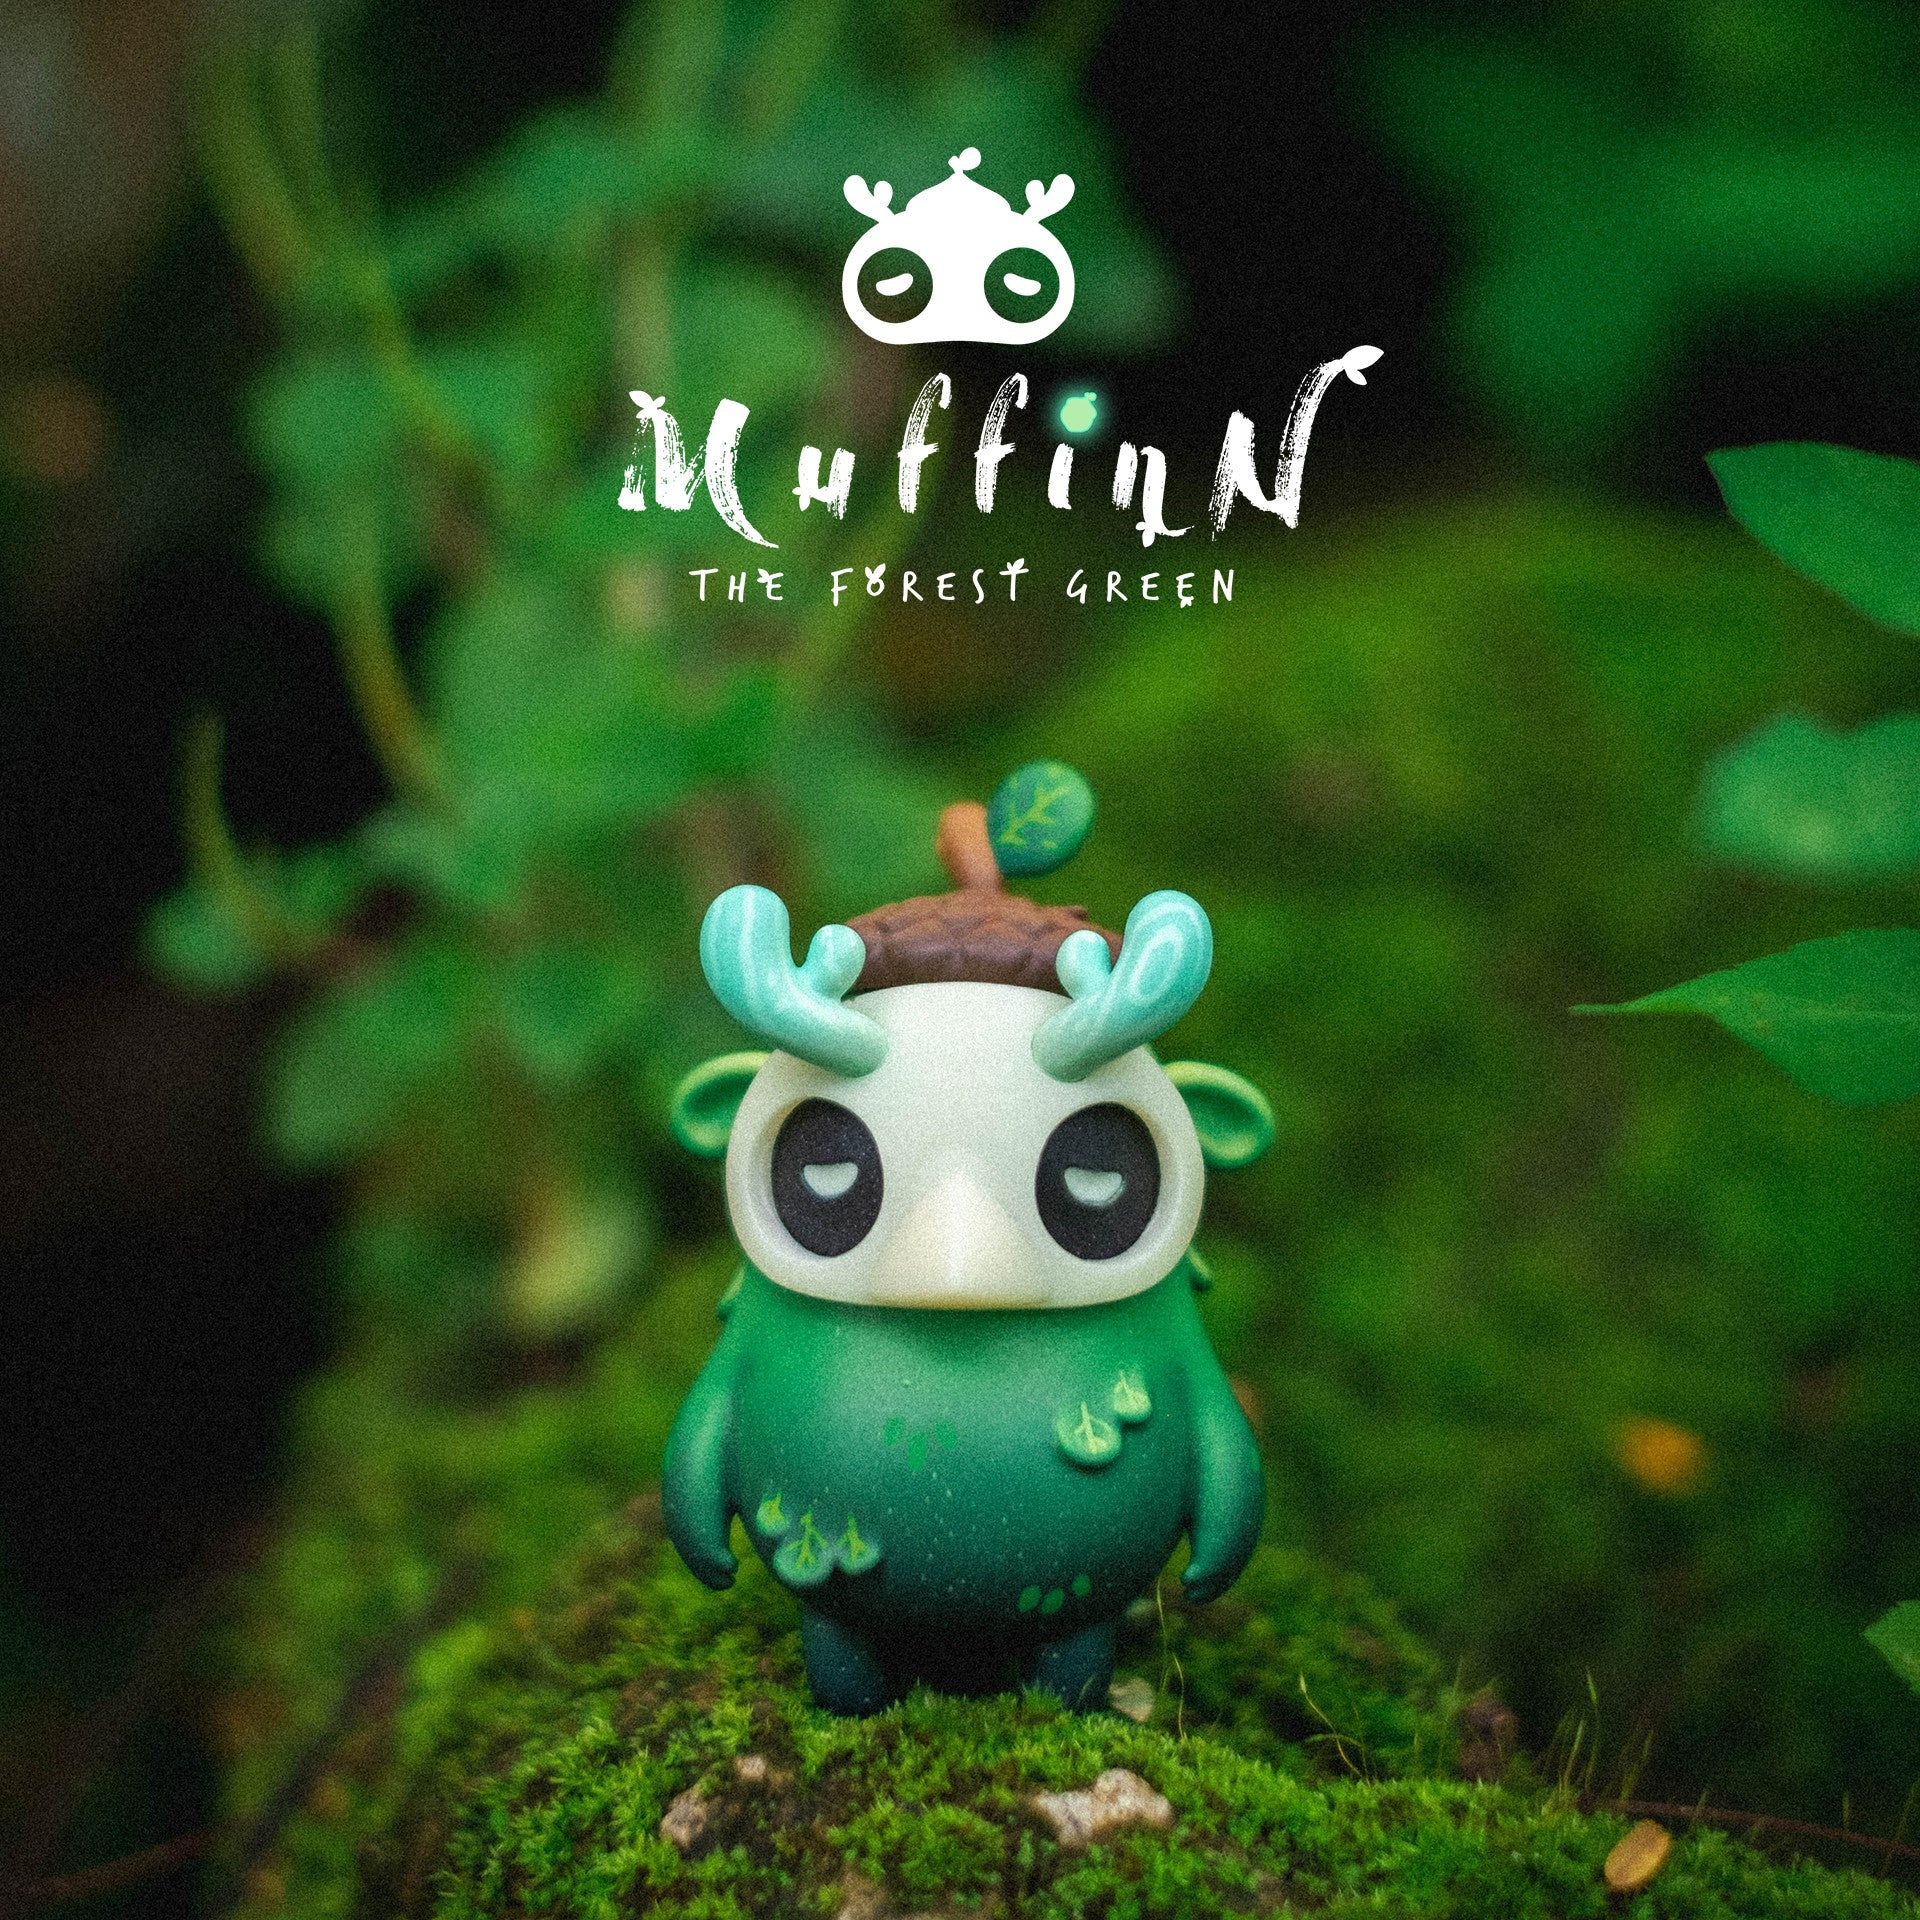 Muffinn - The Forest Green by Madkids